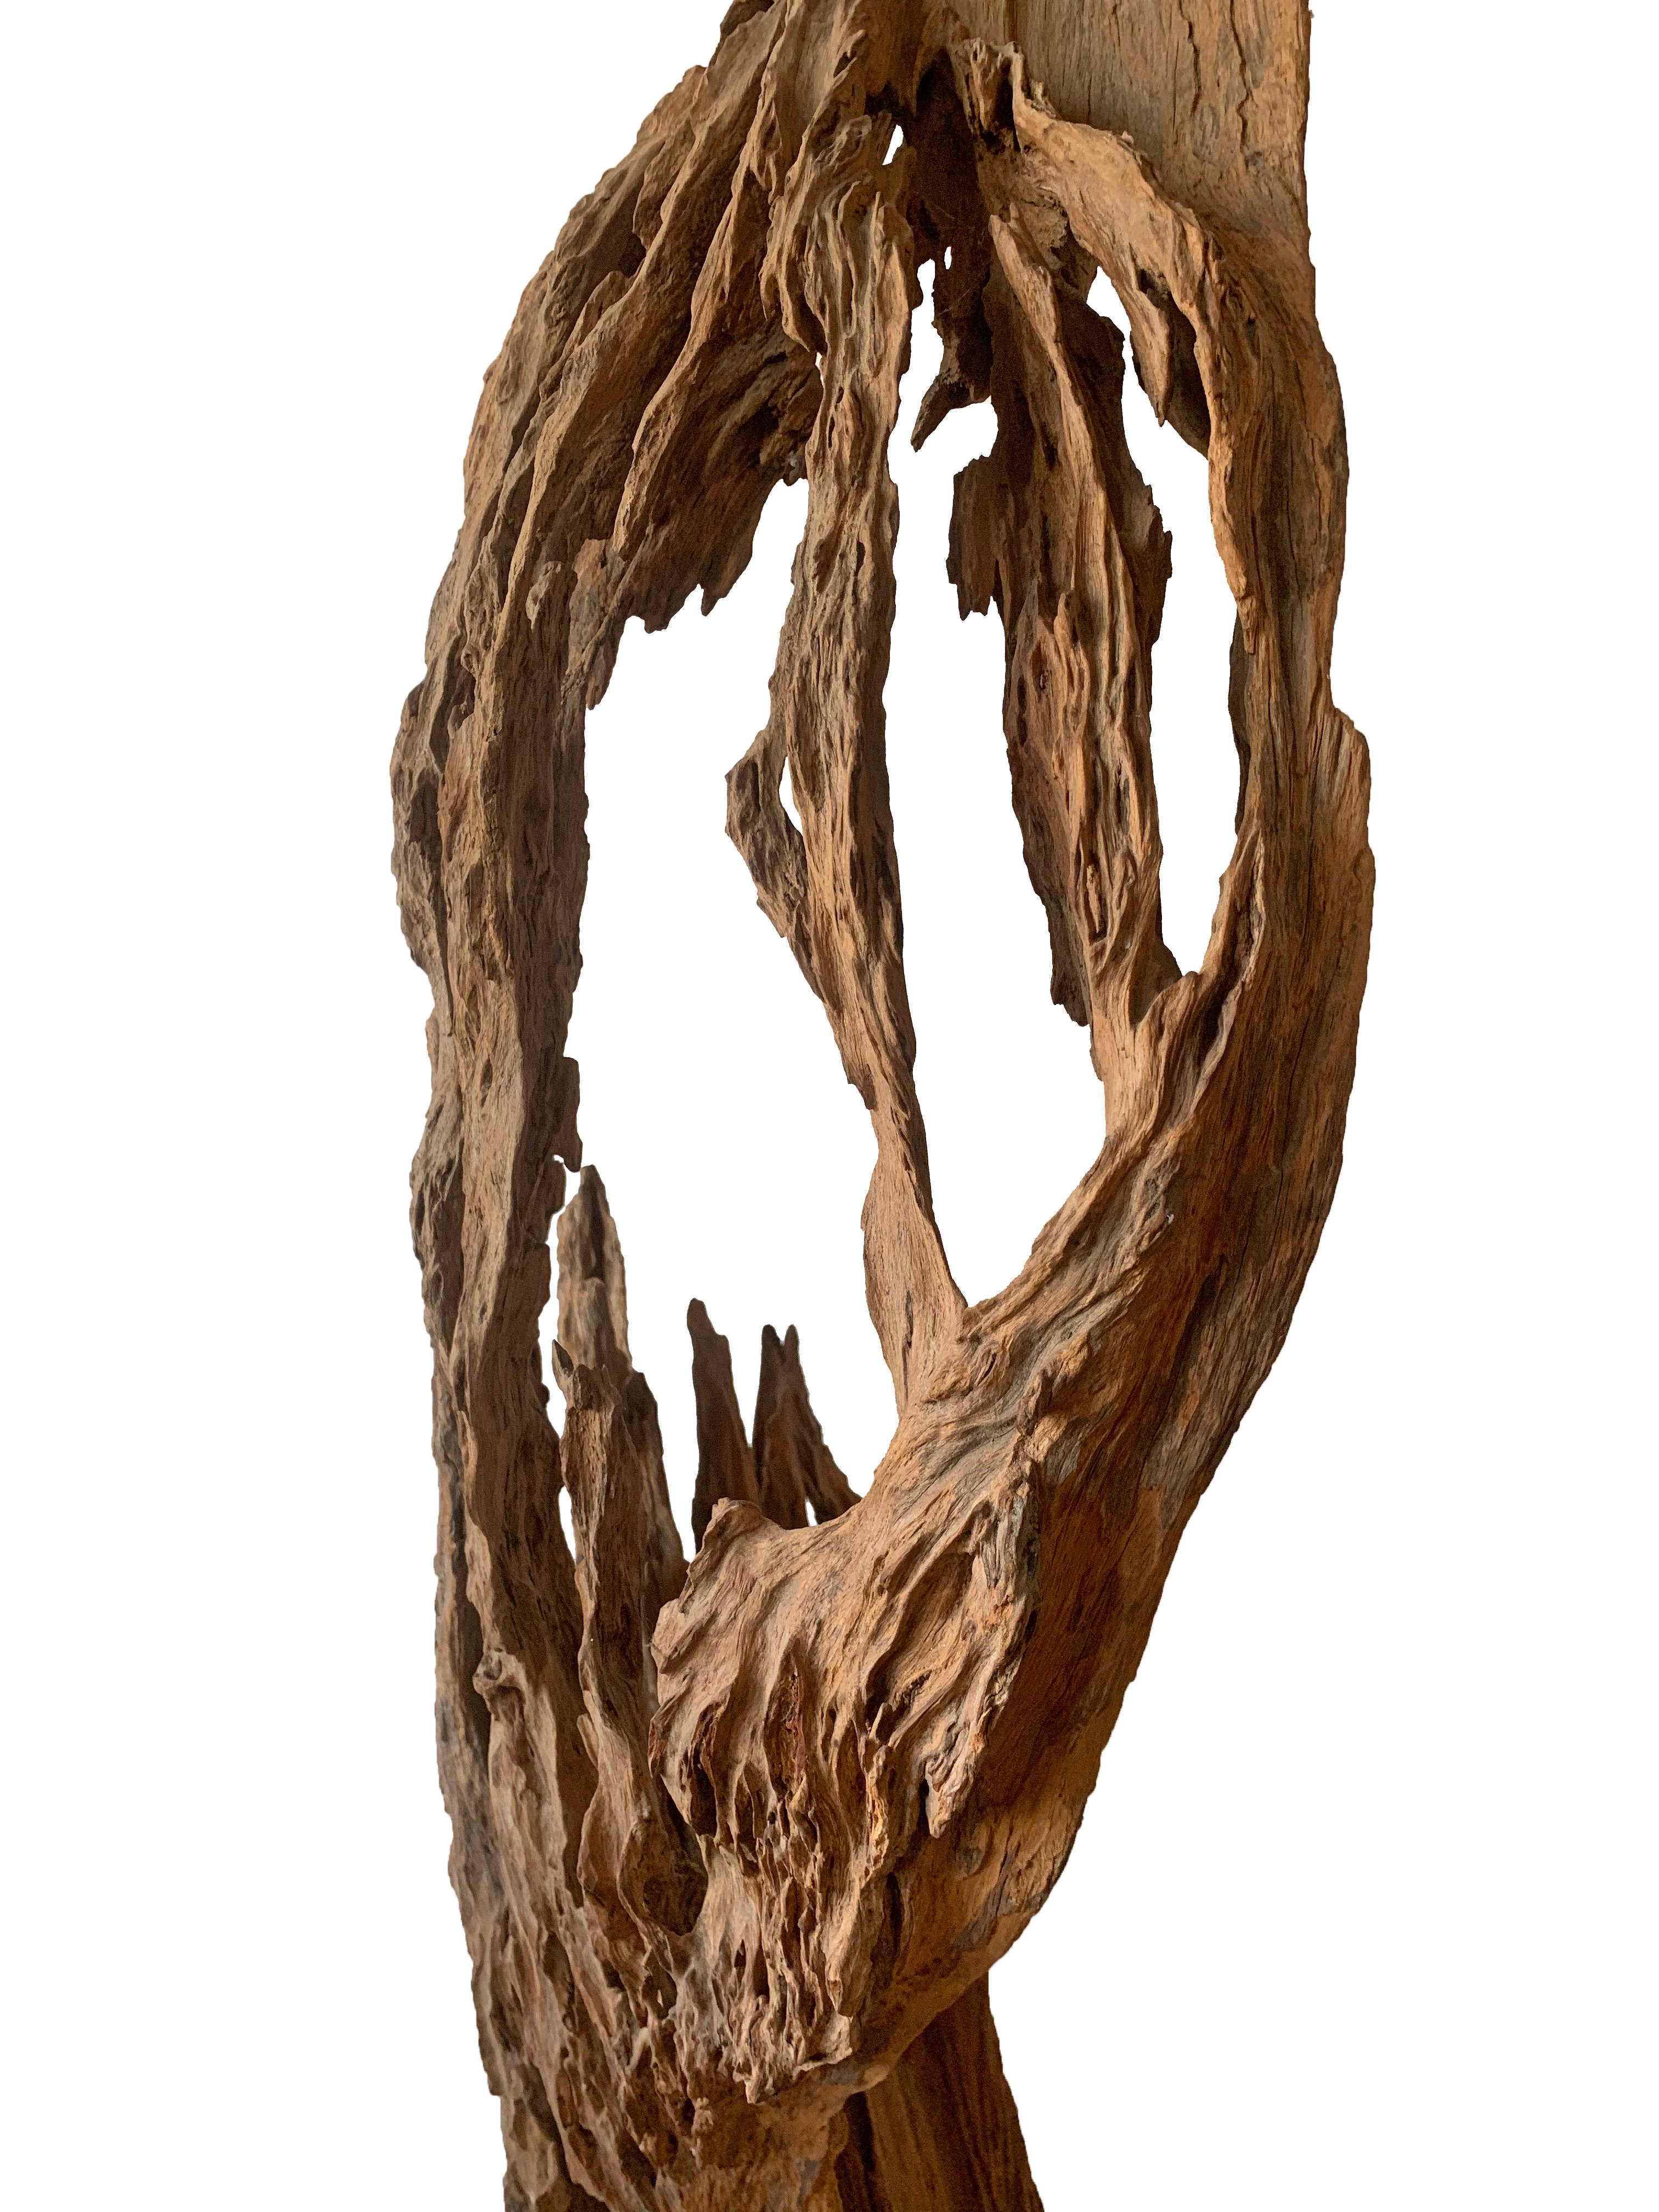 Indonesian Eroded Teak Tree Skeleton Sculpture on Stand, Late 20th Century For Sale